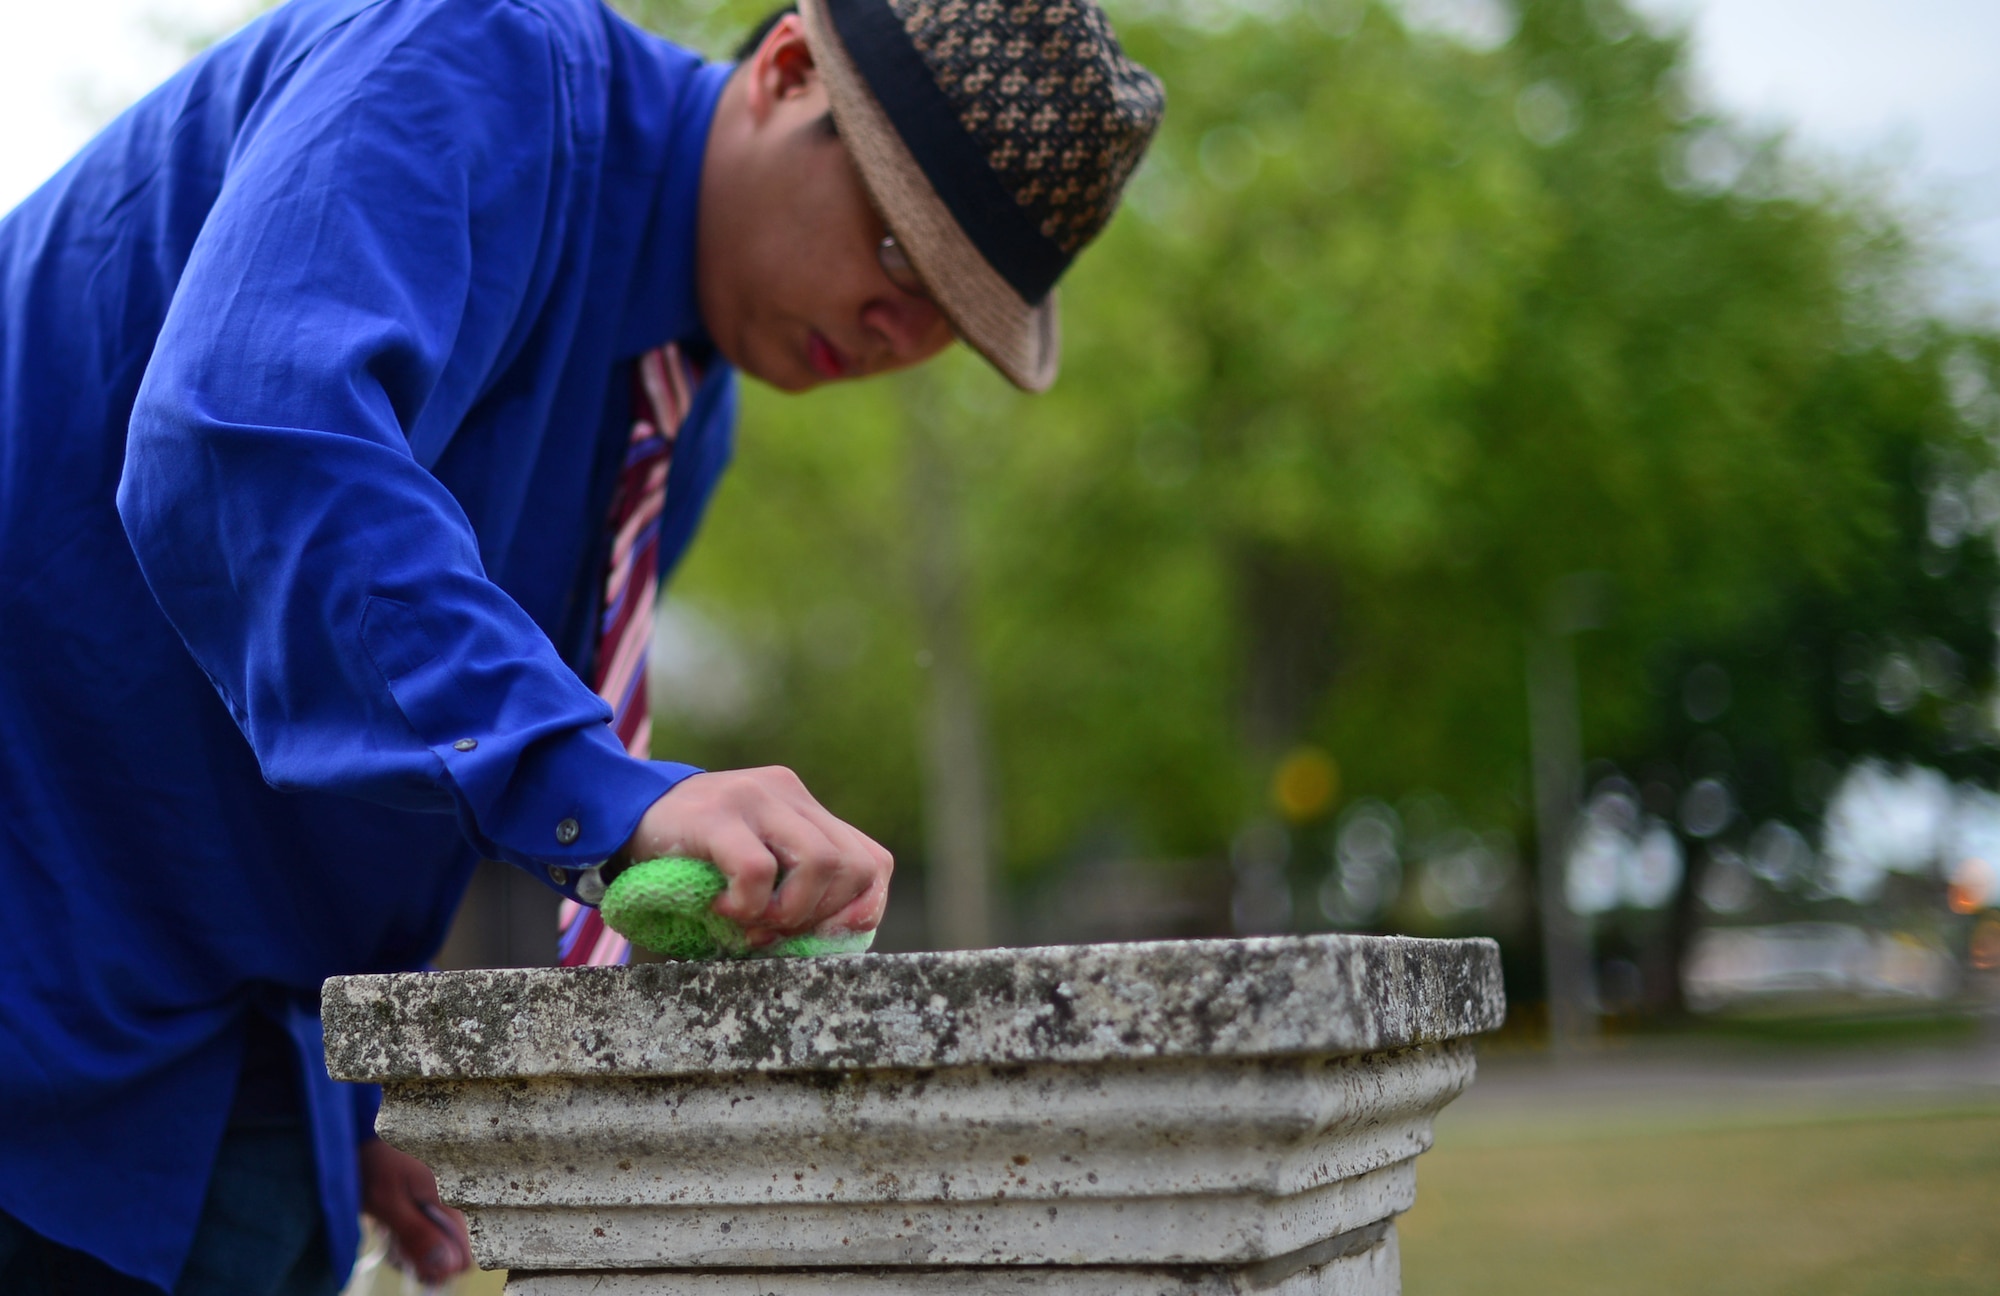 Josh Kelley, a former Air Force Junior ROTC member, cleans a memorial dedicated to the 495th Tactical Fighter Squadron, a deactivated fighter squadron, placed on Royal Air Force Lakenheath, England, June 19, 2015. Kelley replaced the previous plaque, placed in 1991, with a new plaque donated by the base arts and craft center. (U.S. Air Force photo by Senior Airman Erin O’Shea/Released)